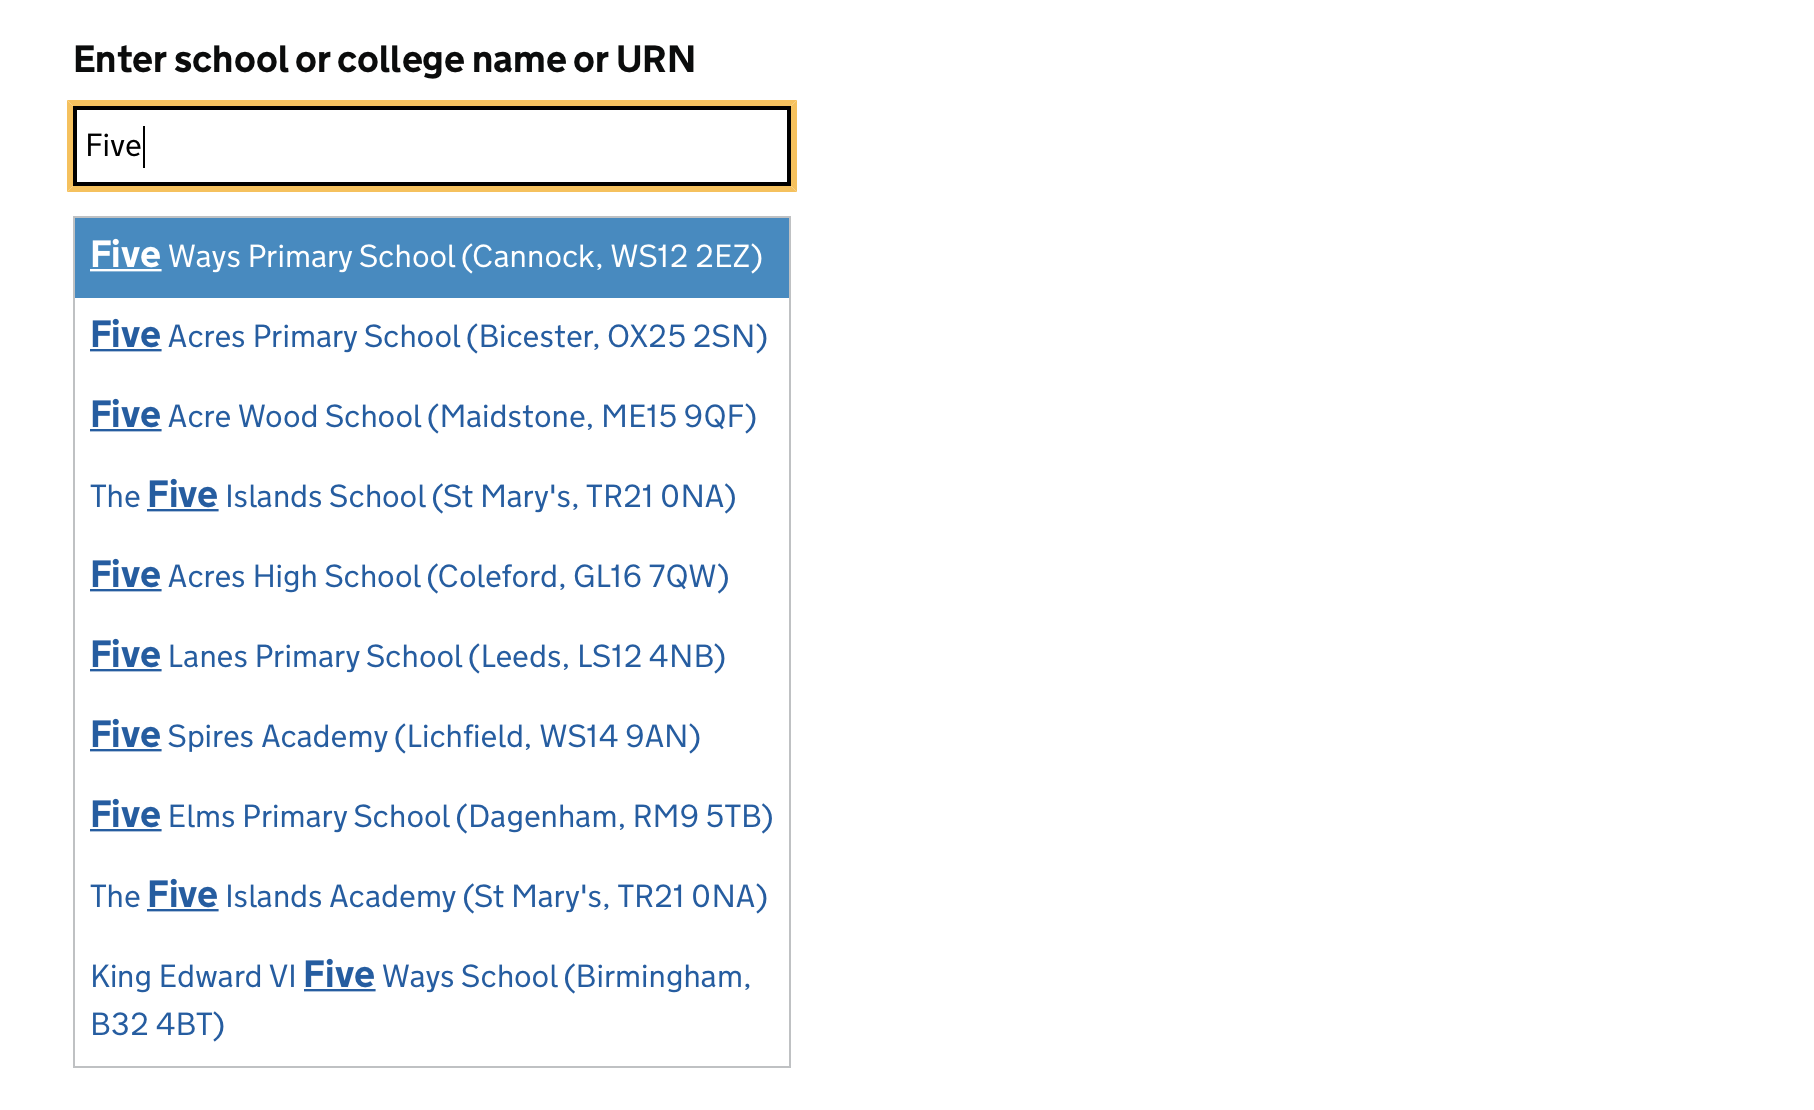 Screenshot showing a text field with the label 'Enter school or college name or URN'. Inside the text field, 'Five' has been entered. Below the text field, a box lists 10 schools that include the word 'Give' in their name, with the word 'Five' highlighted using bold and an underline.